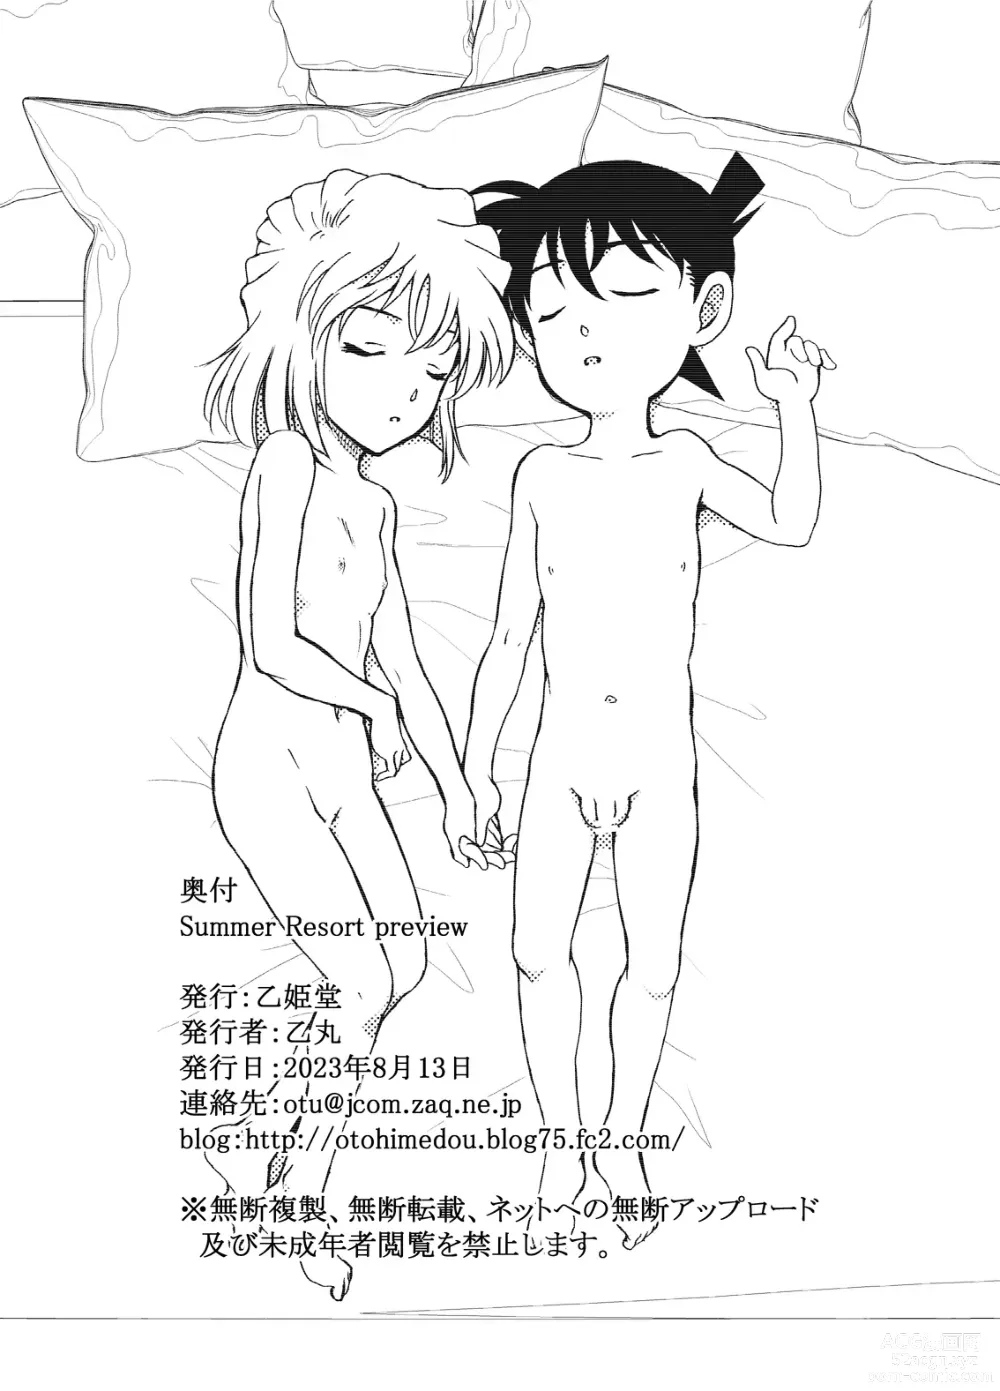 Page 19 of doujinshi Summer Resort Preview